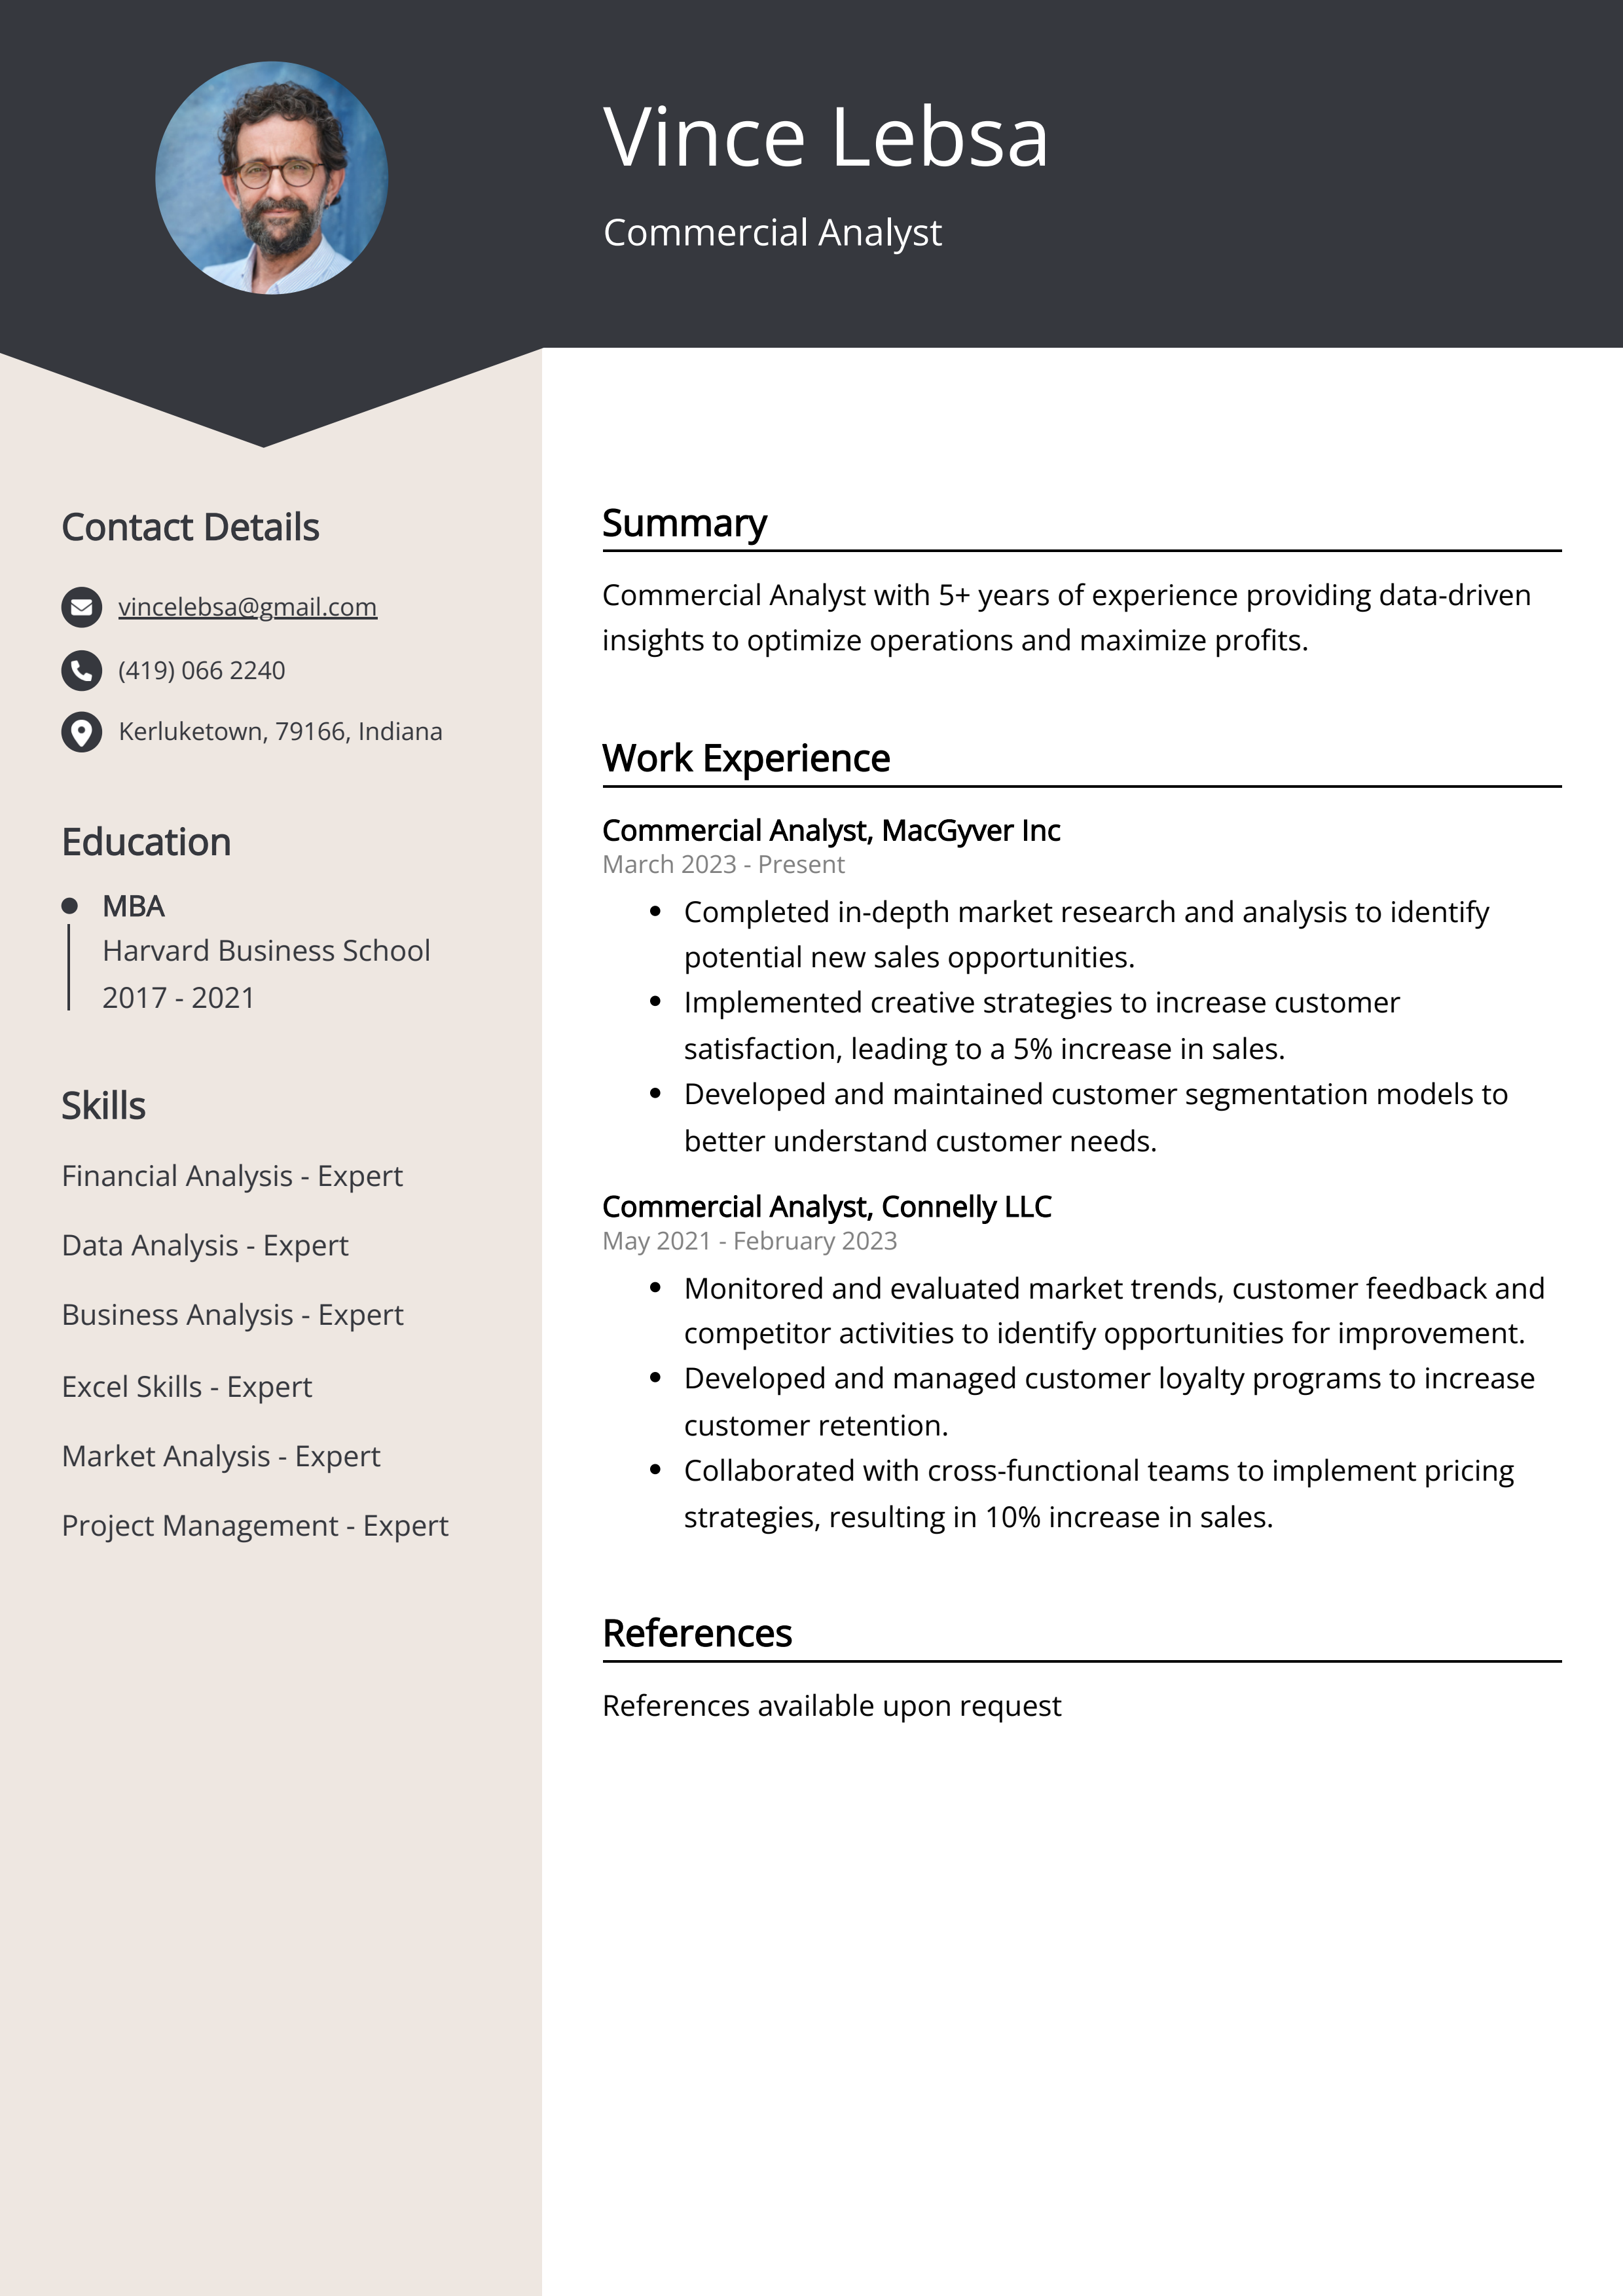 Commercial Analyst CV Example